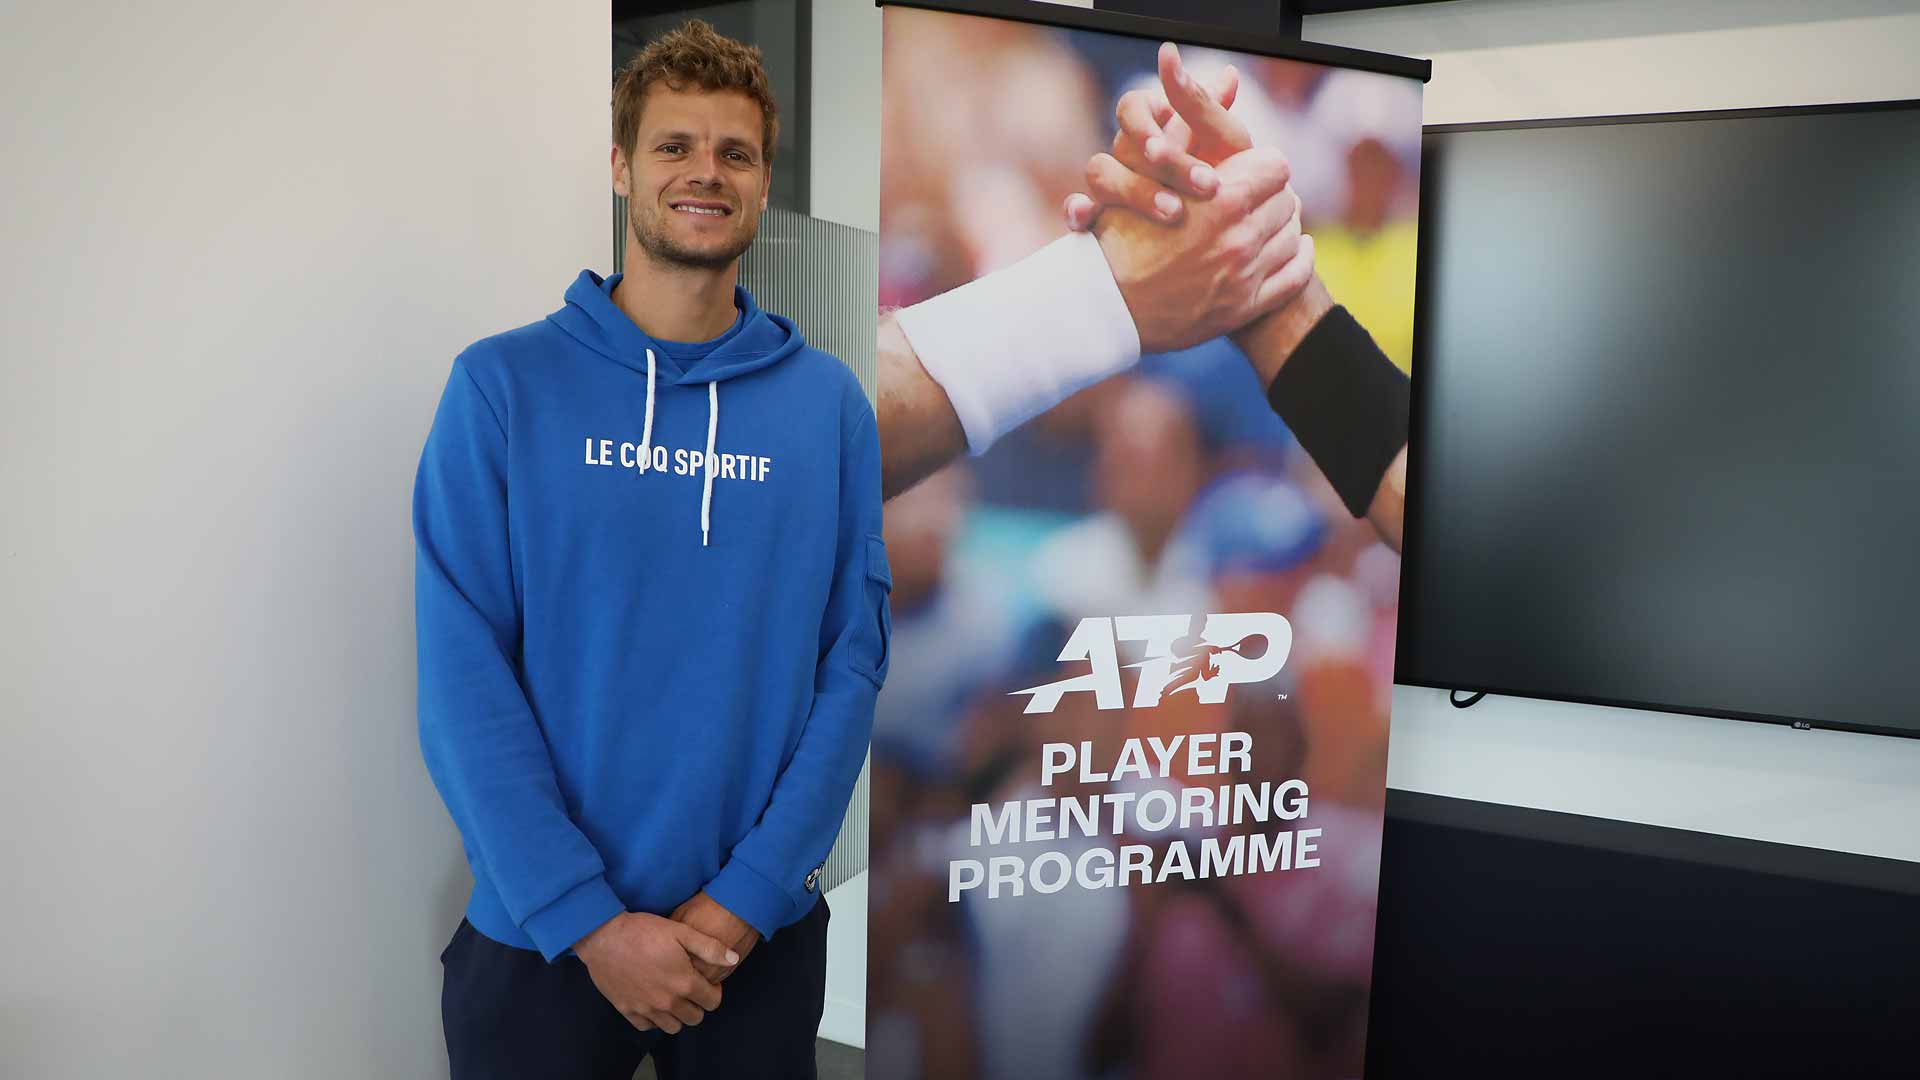 Yannick Hanfmann, who attended college at the University of Southern California, is participating in the ATP Player Mentoring Programme.